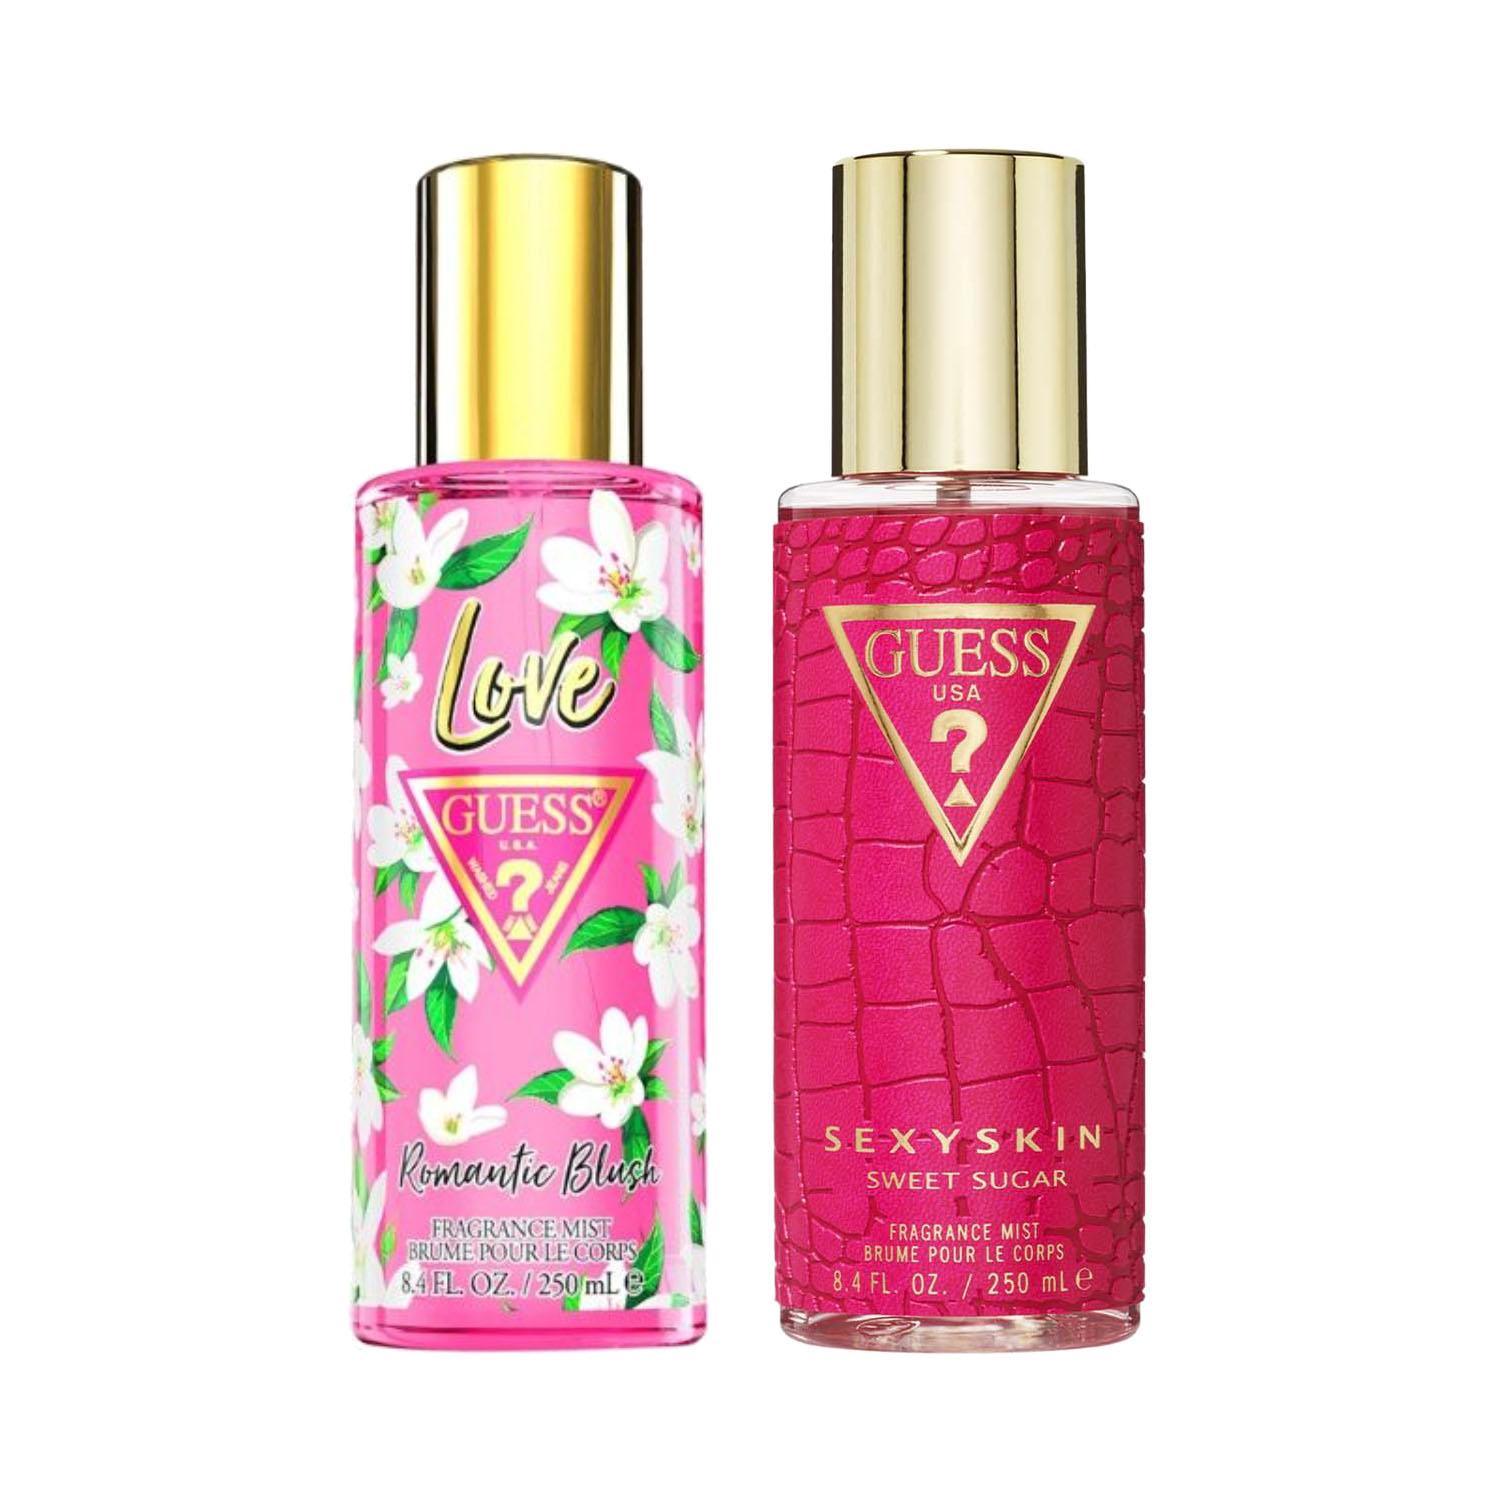 Guess | Guess Love Sun + Sexy Skin Body Mist (Pack of 2)